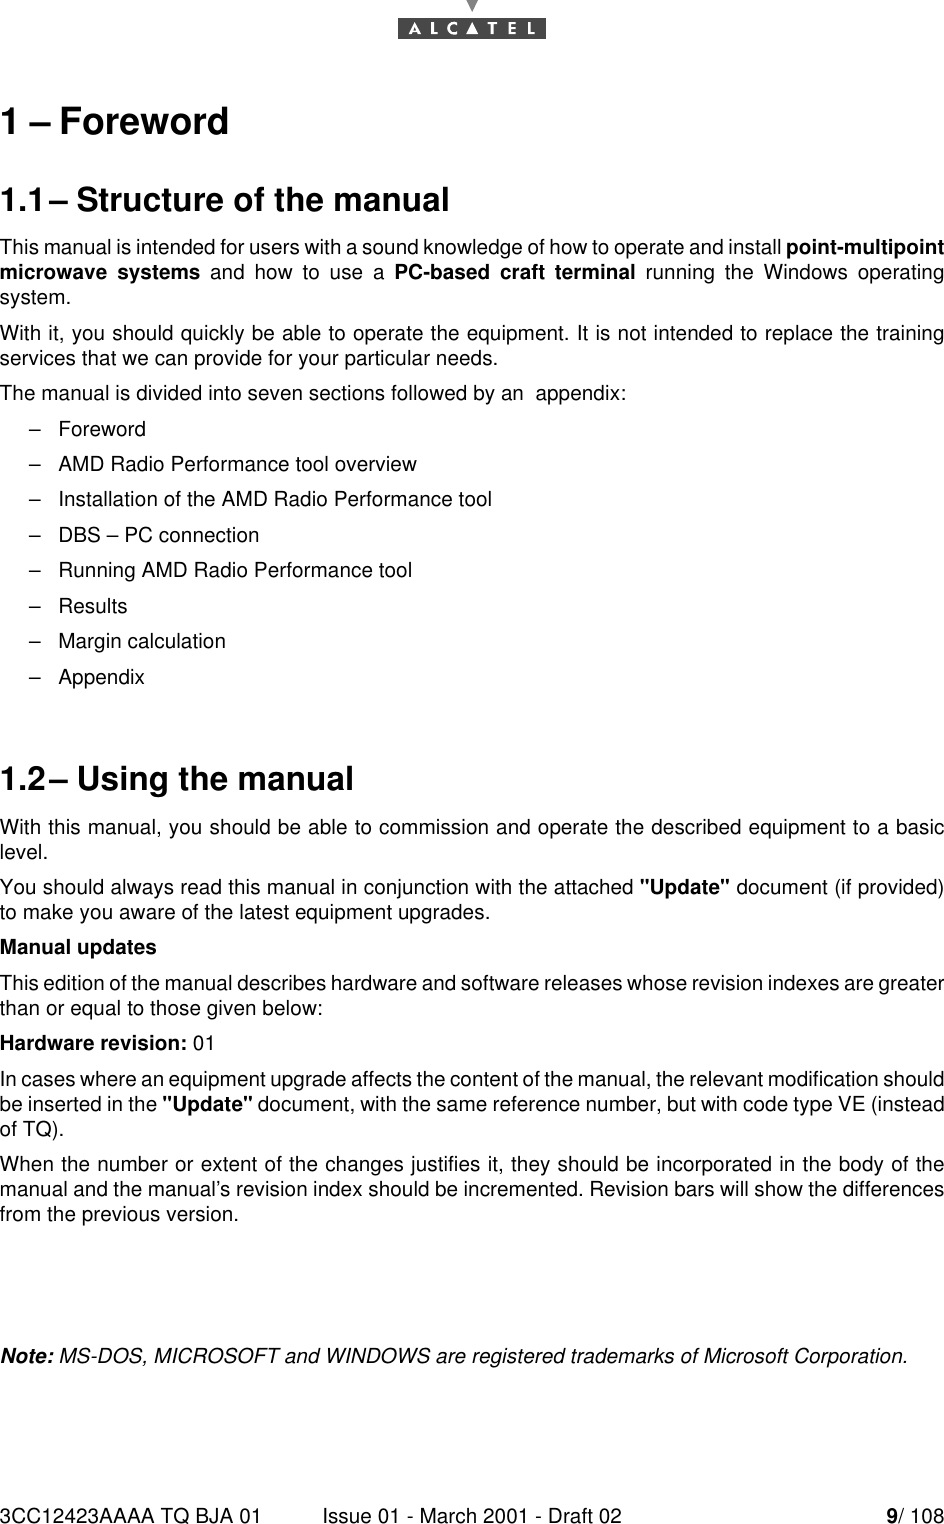 3CC12423AAAA TQ BJA 01 Issue 01 - March 2001 - Draft 02 9/ 108141–Foreword1.1–Structure of the manualThis manual is intended for users with a sound knowledge of how to operate and install point-multipointmicrowave systems and how to use a PC-based craft terminal running the Windows operatingsystem.With it, you should quickly be able to operate the equipment. It is not intended to replace the trainingservices that we can provide for your particular needs.The manual is divided into seven sections followed by an  appendix:–Foreword–AMD Radio Performance tool overview–Installation of the AMD Radio Performance tool–DBS – PC connection–Running AMD Radio Performance tool–Results–Margin calculation–Appendix1.2–Using the manualWith this manual, you should be able to commission and operate the described equipment to a basiclevel.You should always read this manual in conjunction with the attached &quot;Update&quot; document (if provided)to make you aware of the latest equipment upgrades.Manual updatesThis edition of the manual describes hardware and software releases whose revision indexes are greaterthan or equal to those given below:Hardware revision: 01In cases where an equipment upgrade affects the content of the manual, the relevant modification shouldbe inserted in the &quot;Update&quot; document, with the same reference number, but with code type VE (insteadof TQ).When the number or extent of the changes justifies it, they should be incorporated in the body of themanual and the manual’s revision index should be incremented. Revision bars will show the differencesfrom the previous version.Note: MS-DOS, MICROSOFT and WINDOWS are registered trademarks of Microsoft Corporation.